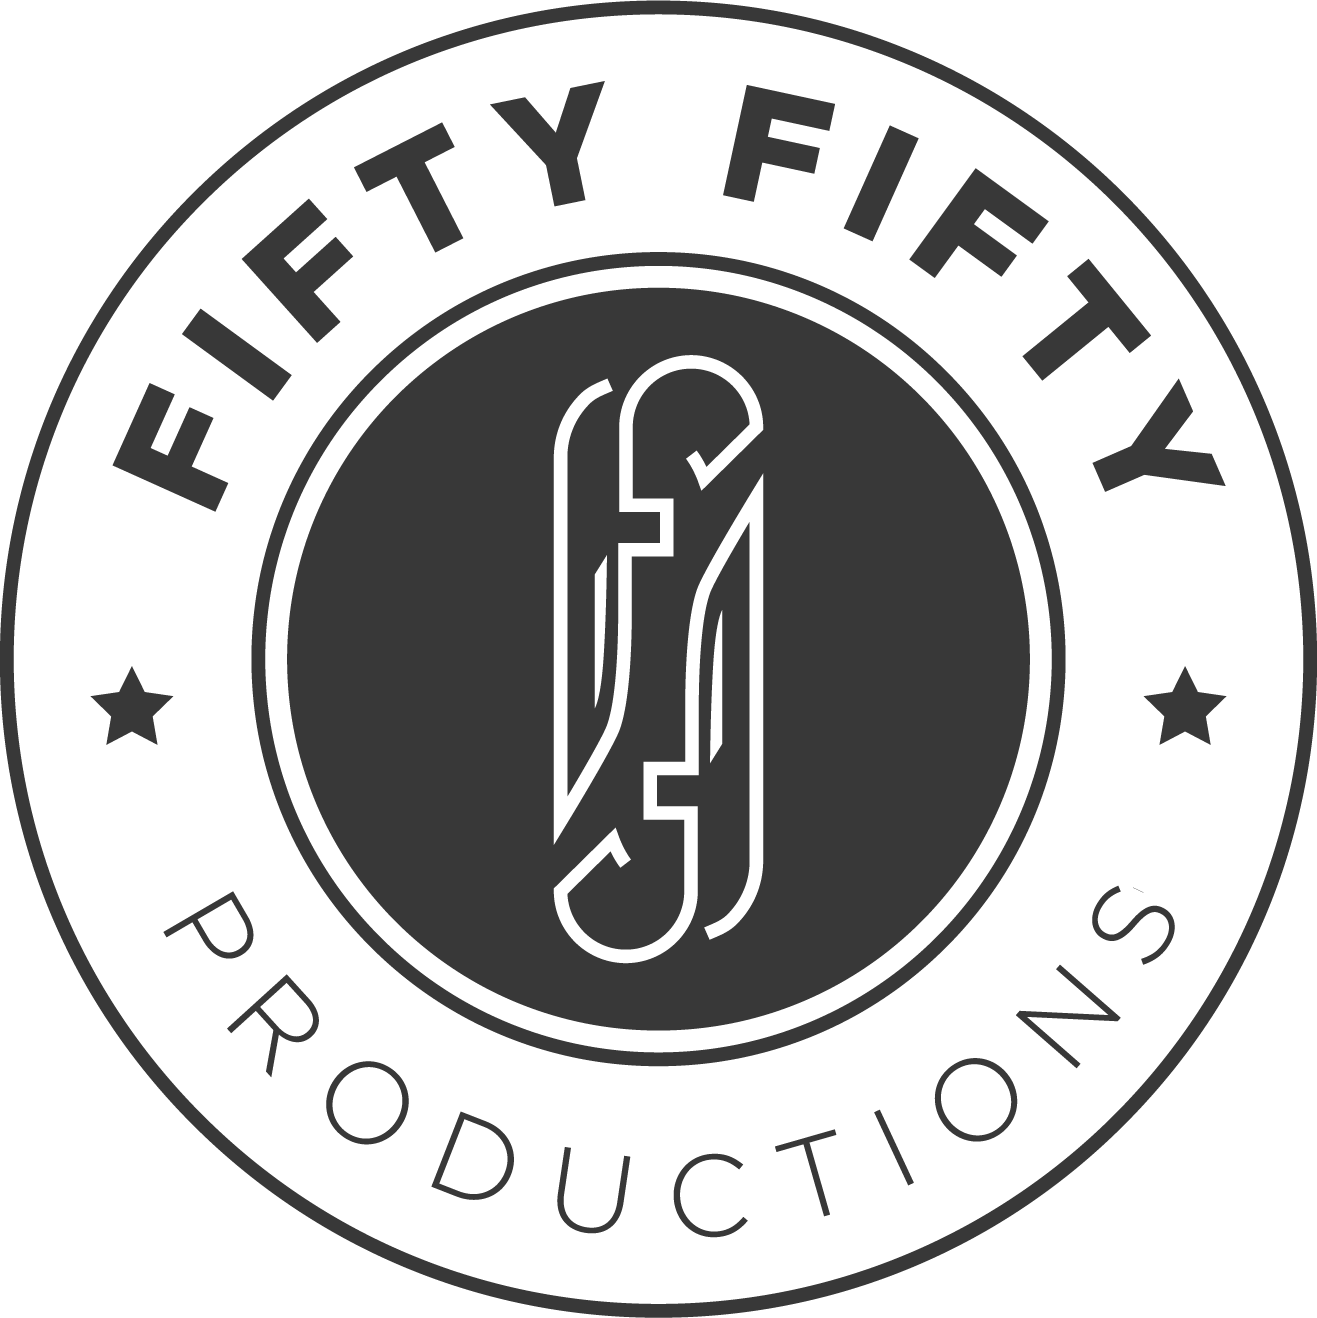 www.fiftyfiftyproductions.net